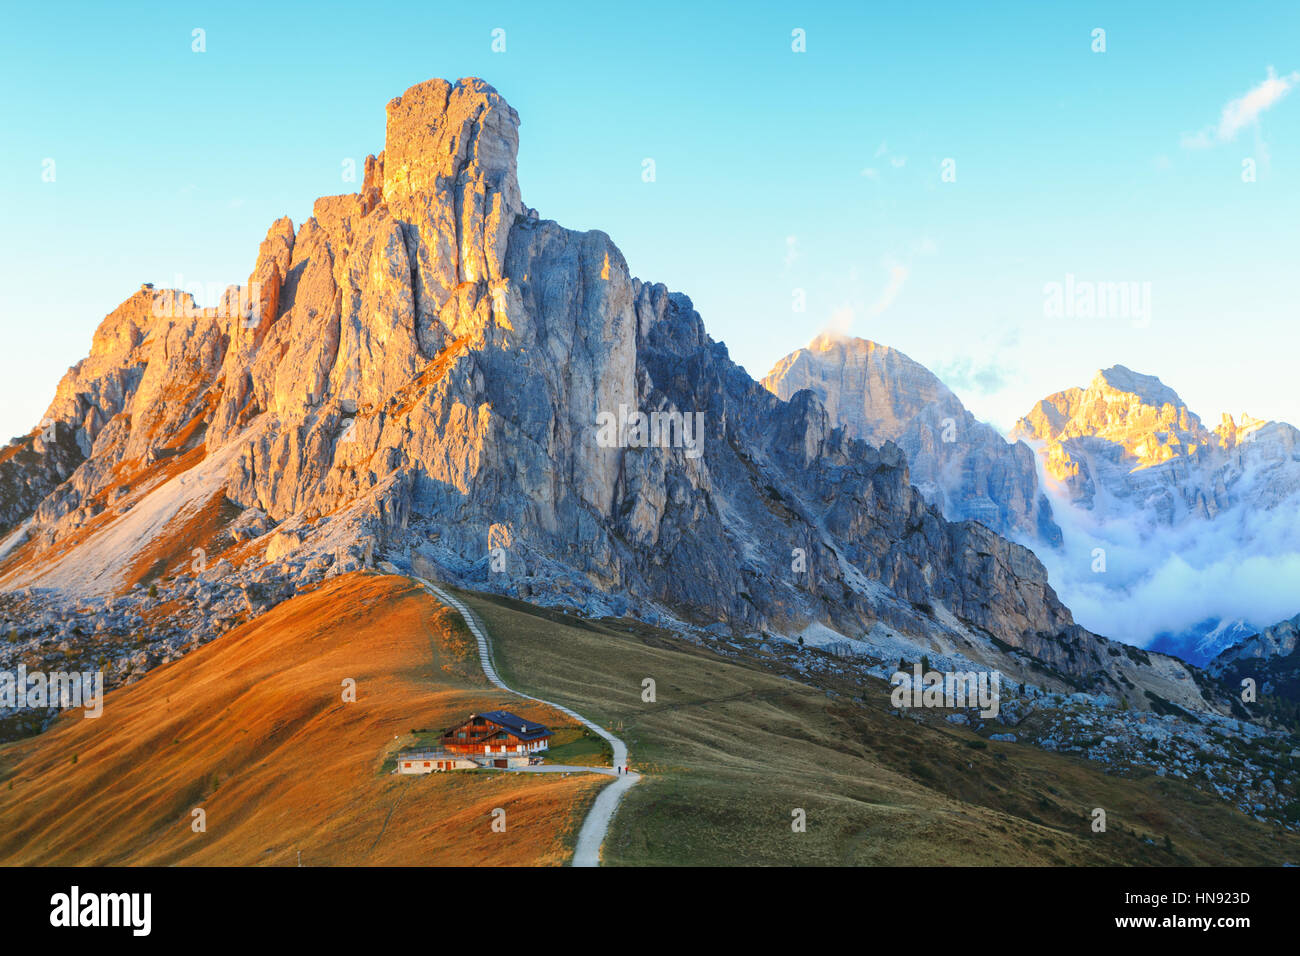 Dolomites mountains the Passo di Giau, Monte Gusela at behind  Nuvolau gruppe at sunset in South Tyrol, Italy Stock Photo